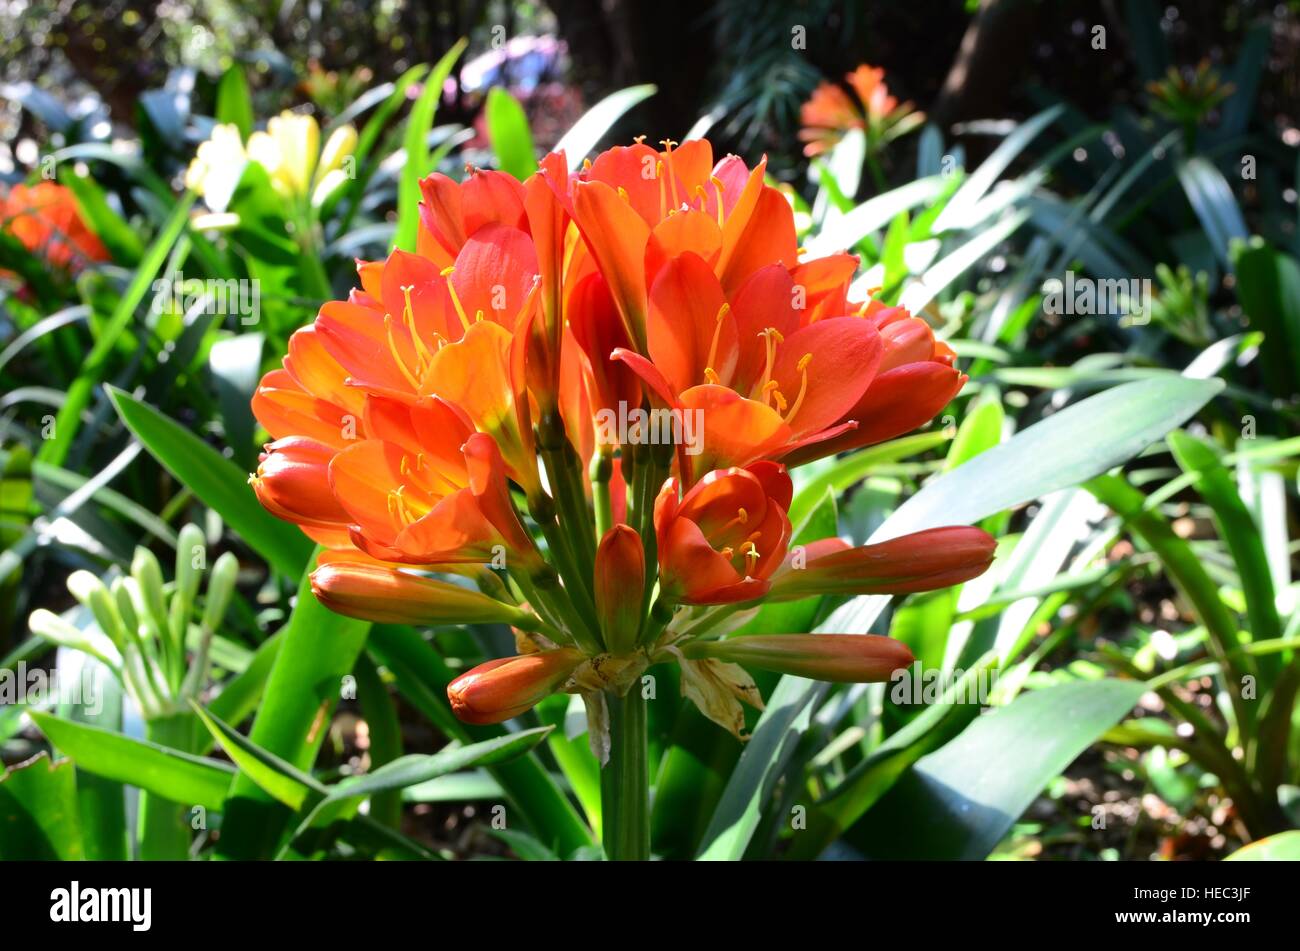 Blooming orange Clivia miniata, showing strap-shaped leaves of the plant. Indigenous to South Africa. Grows best  in cool shady areas. Amaryllidaceae Stock Photo